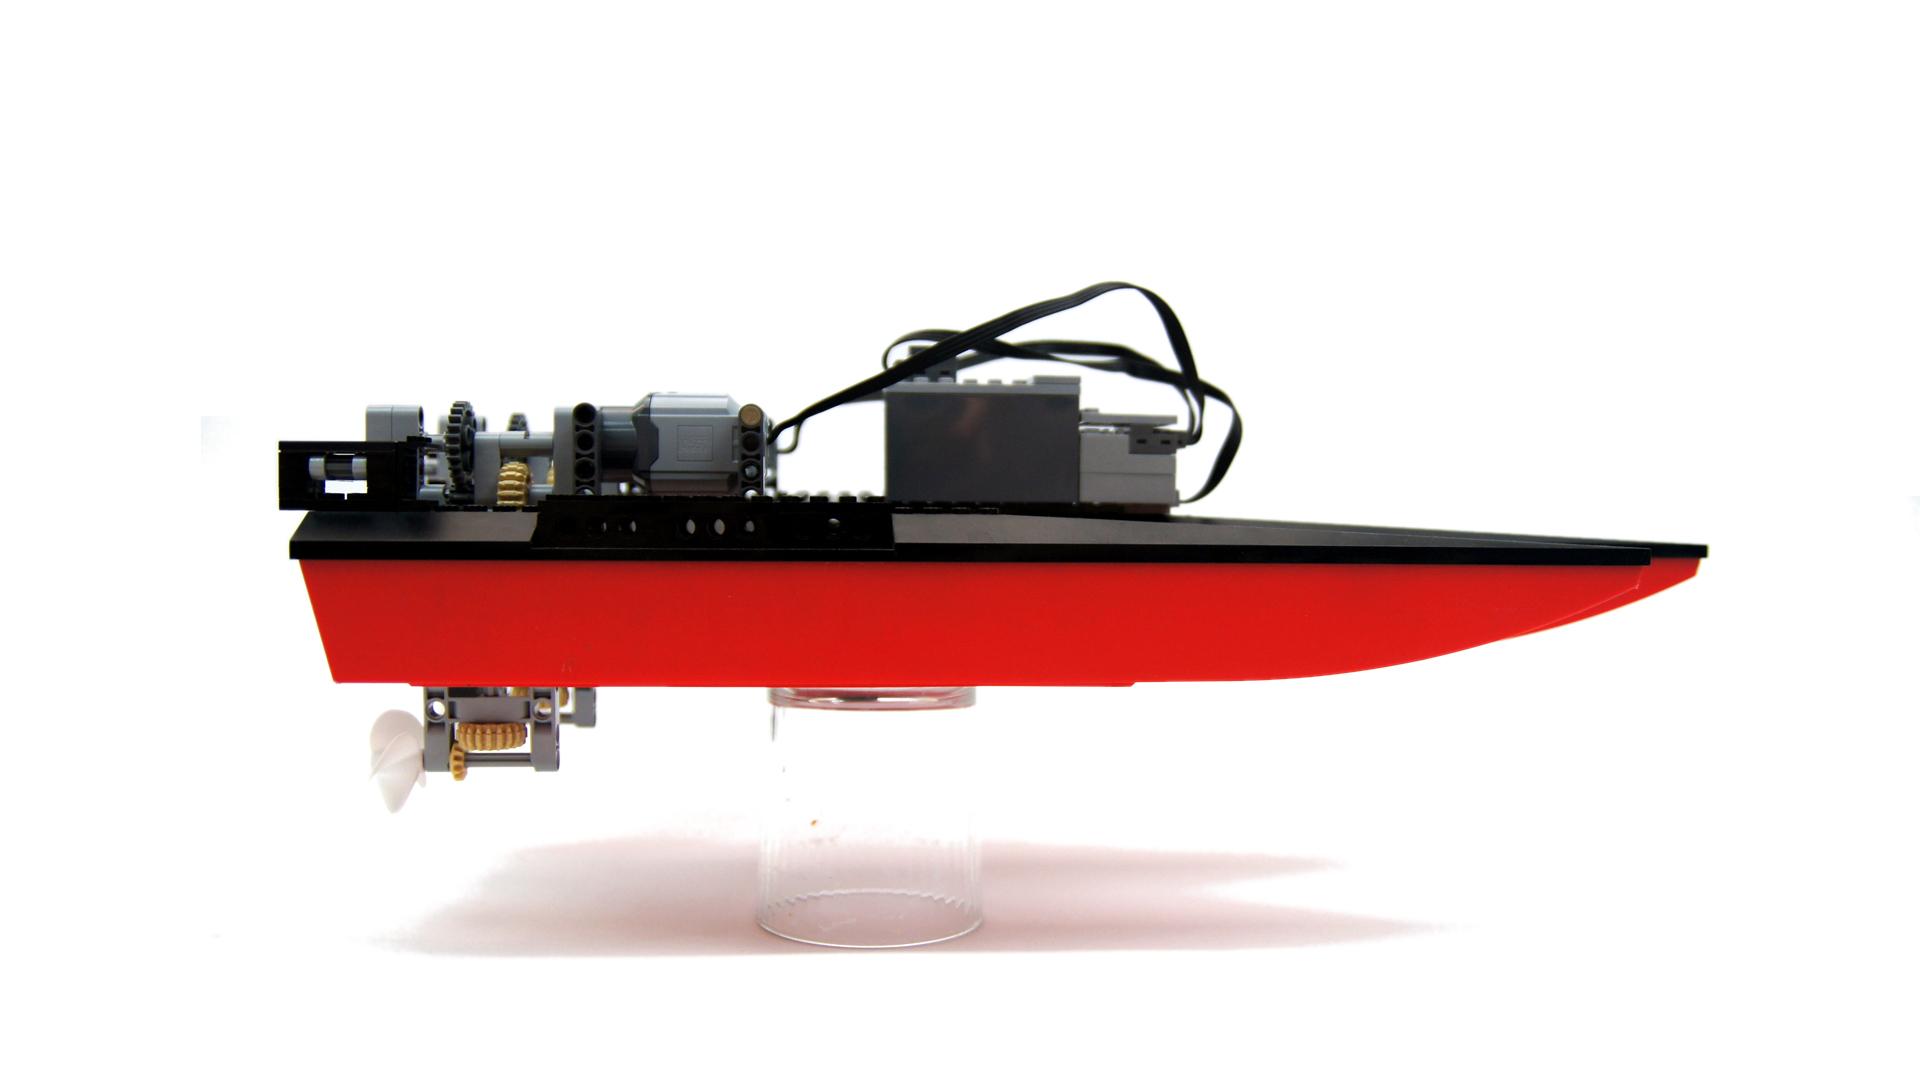 LEGO Expert Builds Incredible RC Boat with 3D Printed 